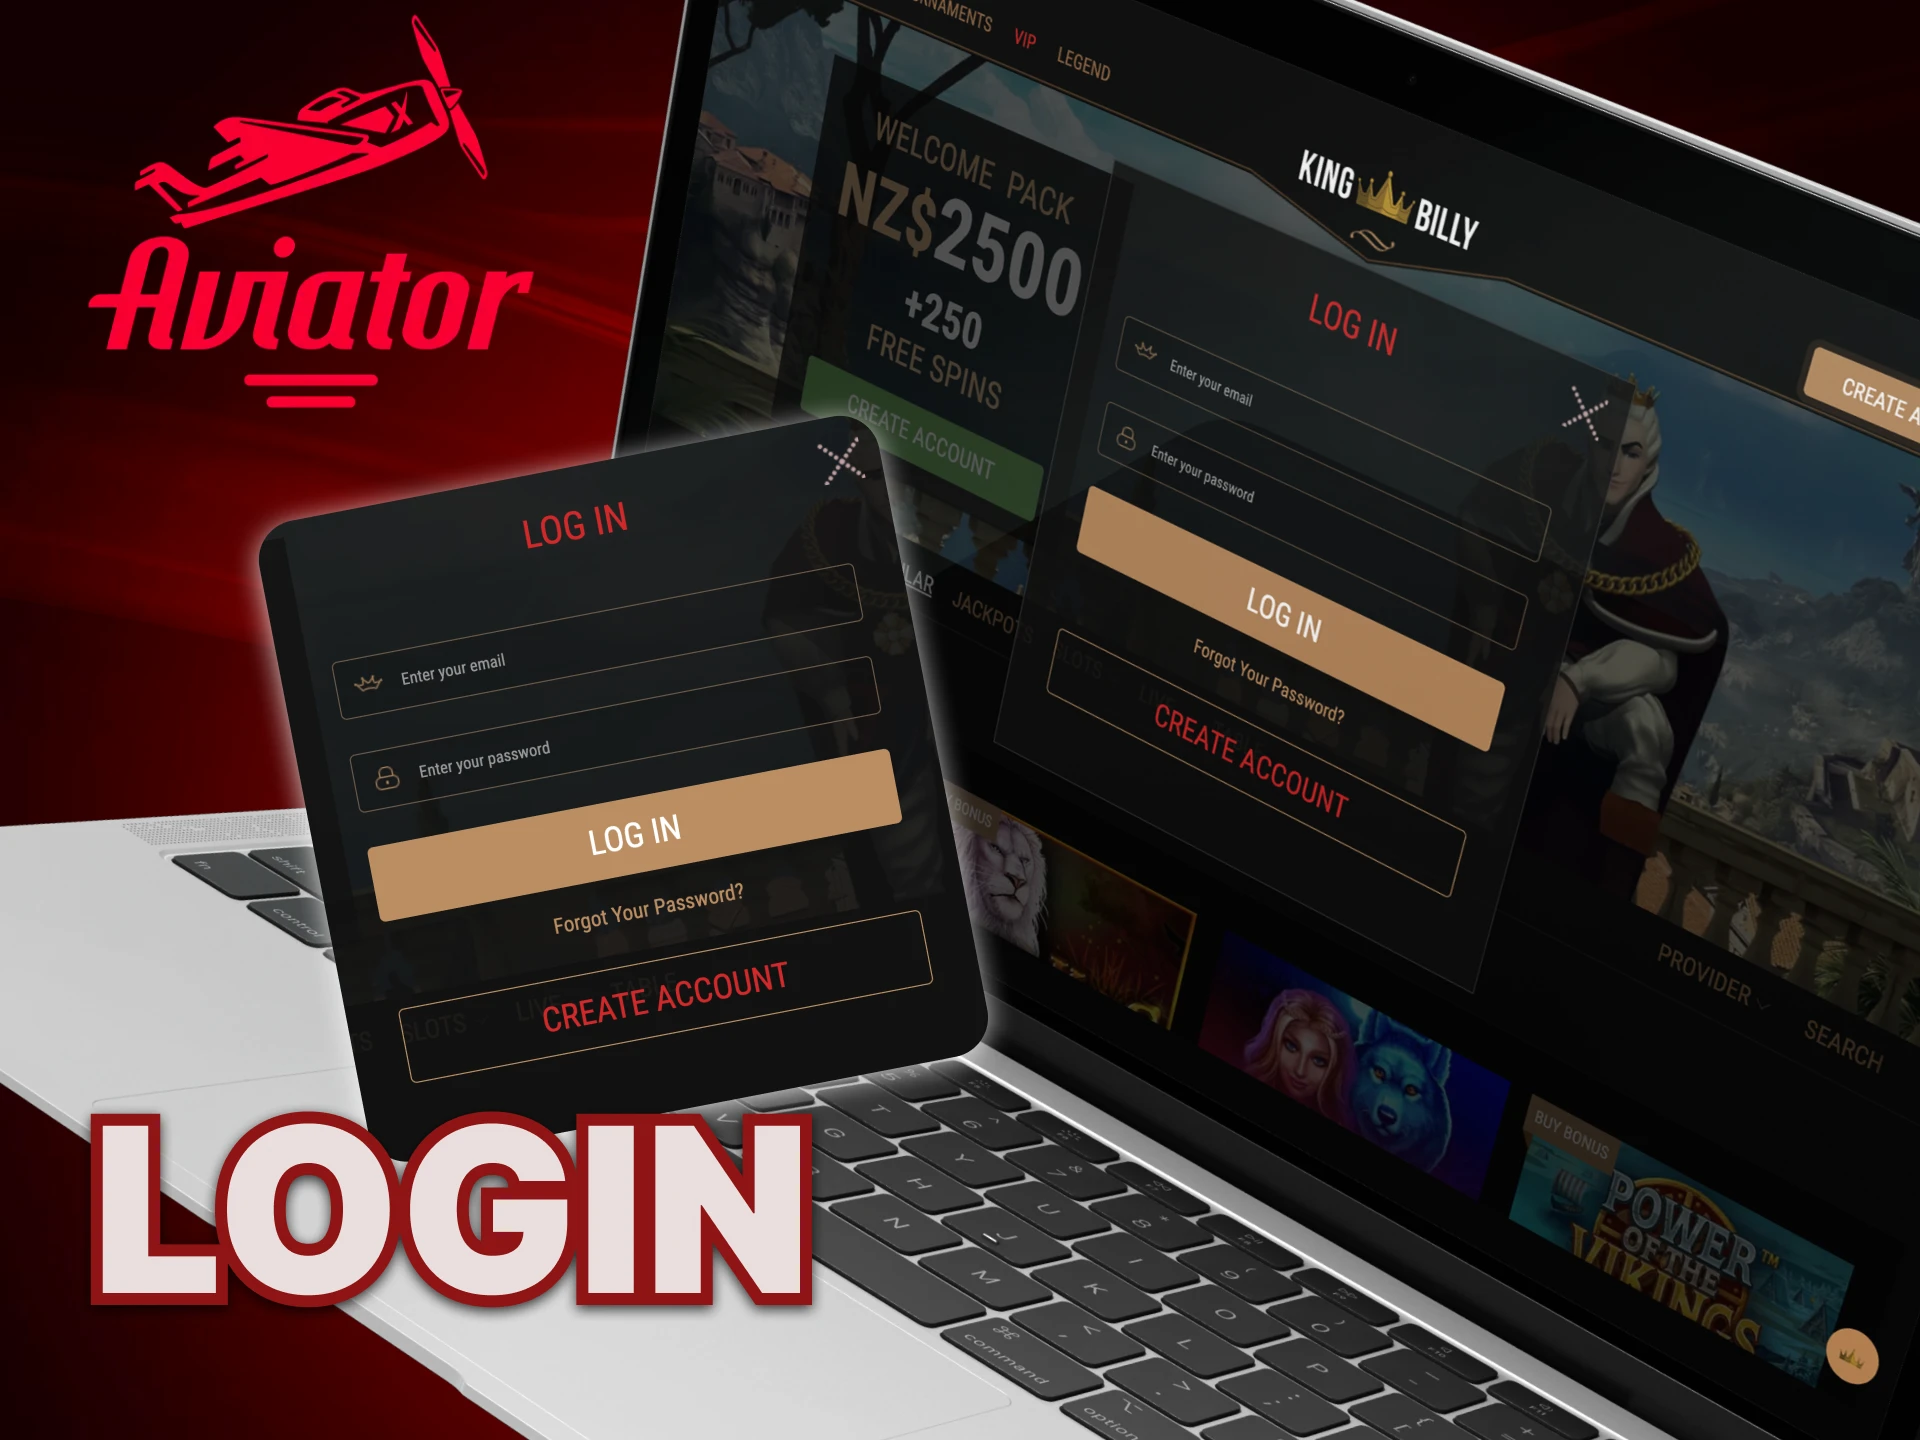 How to log in to the Aviator game.